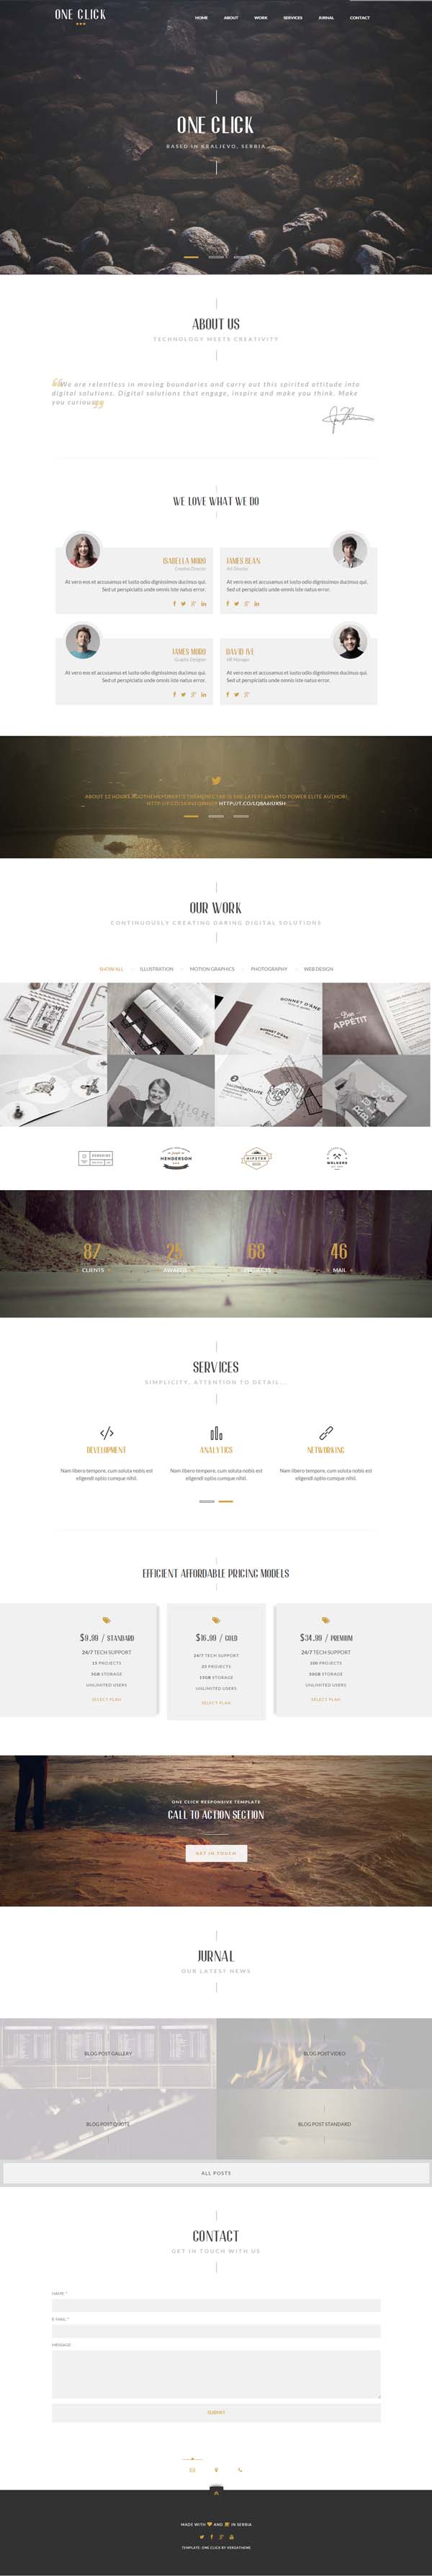 One Click – Parallax One Page WordPress Theme